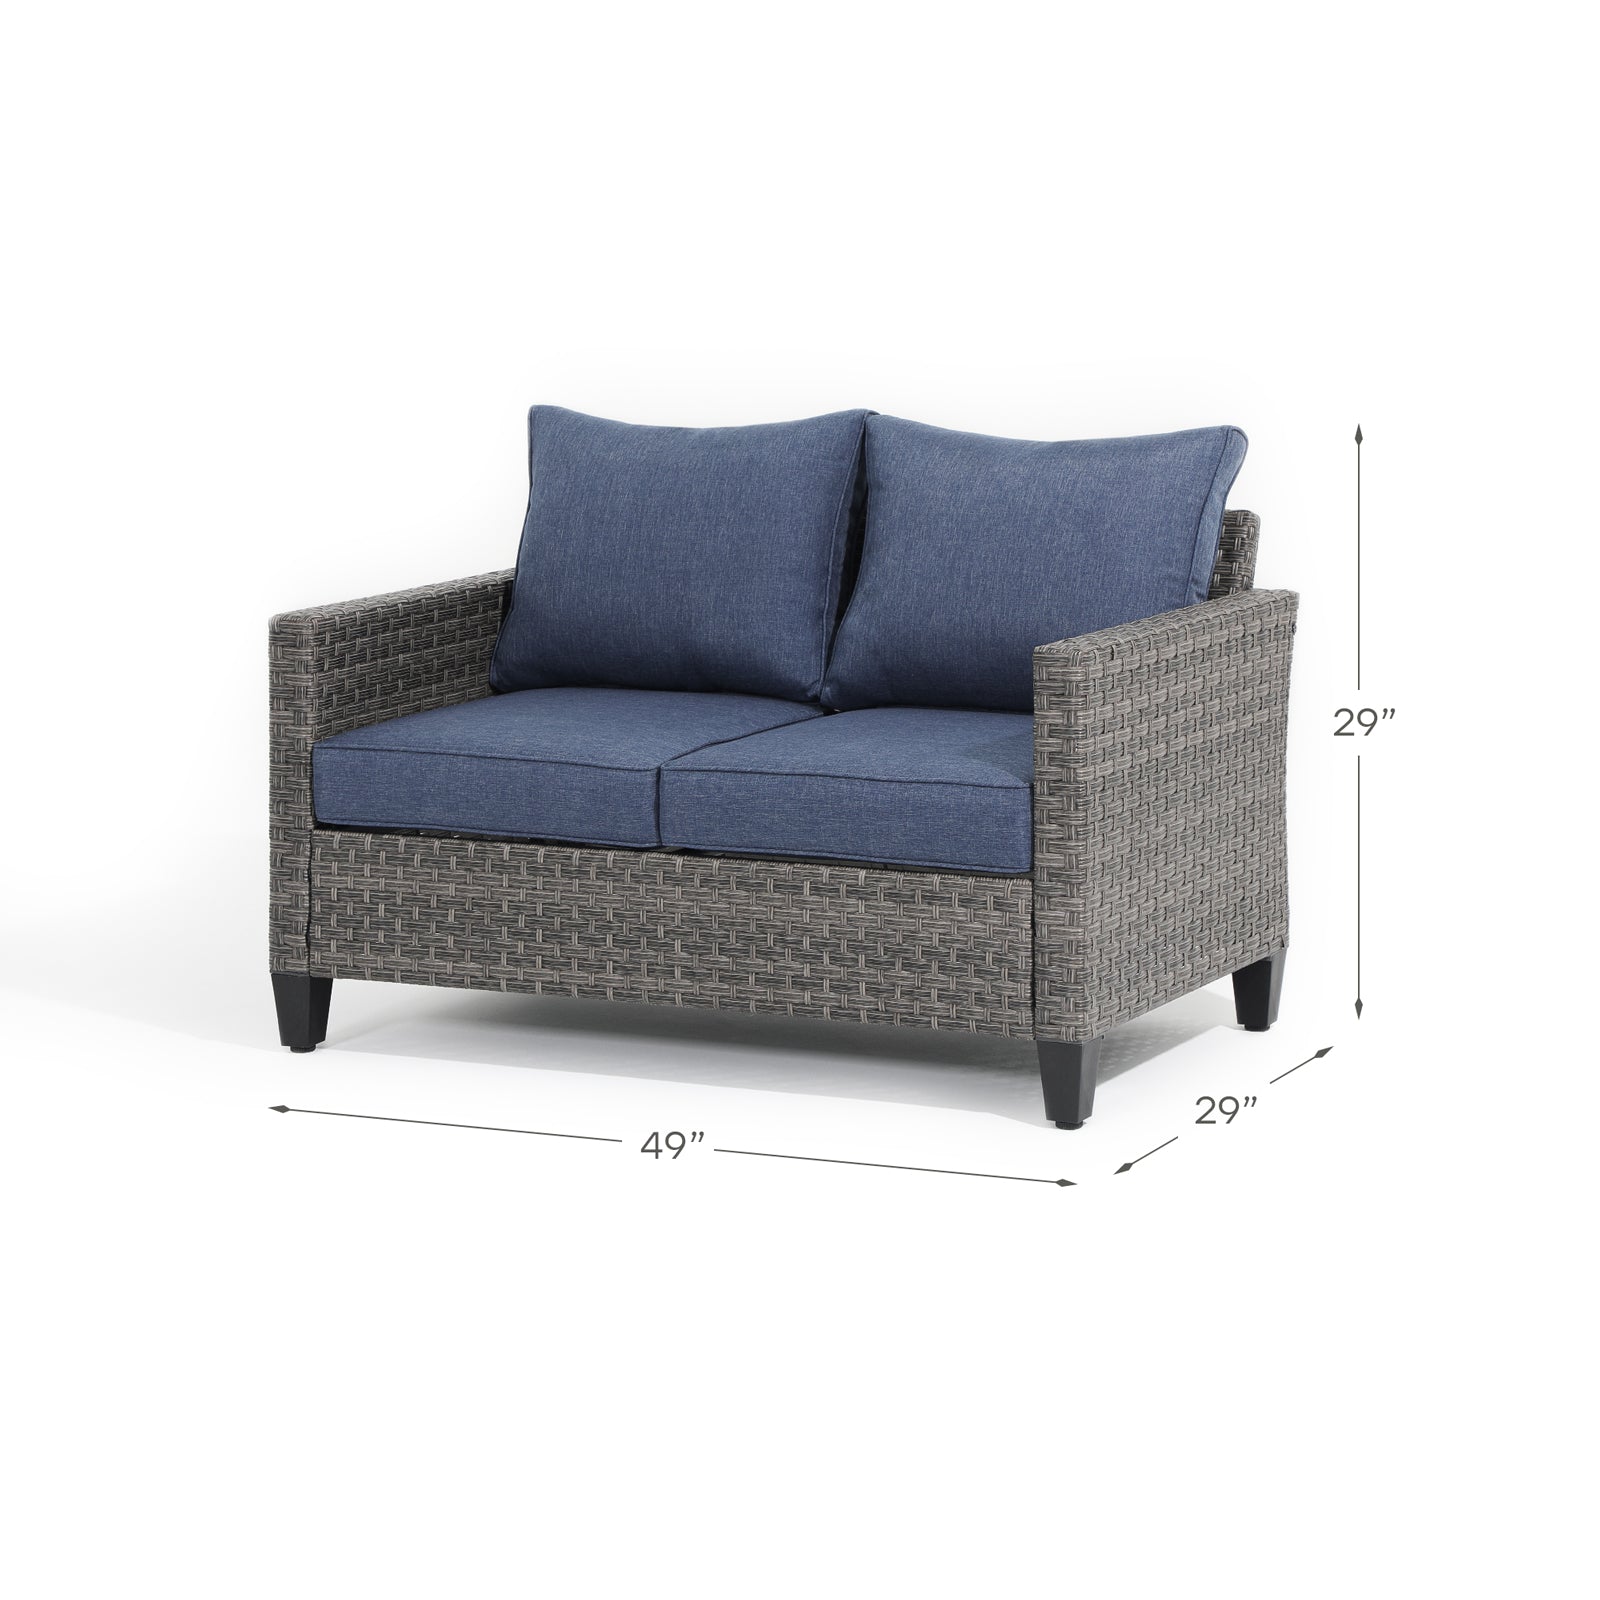 Ayia loveseat with rattan design, blue cushions, dimension information - Jardina Furniture#color_Navy Blue